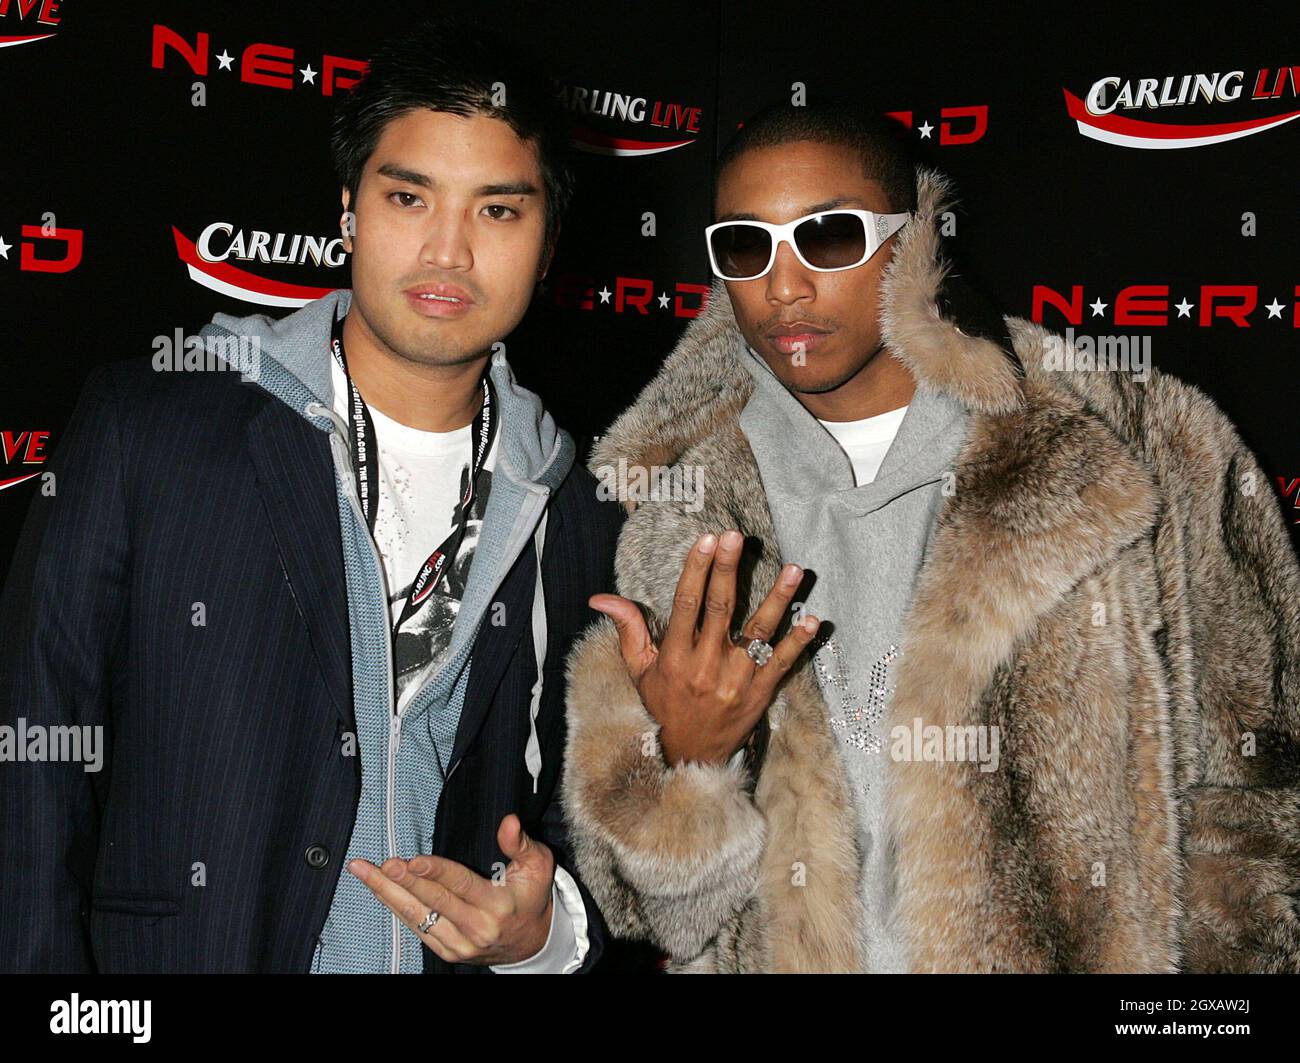 Chad Hugo and Pharrell Williams attend the aftershow party following the final gig this year by N*E*R*D, at Sketch in London.  Stock Photo